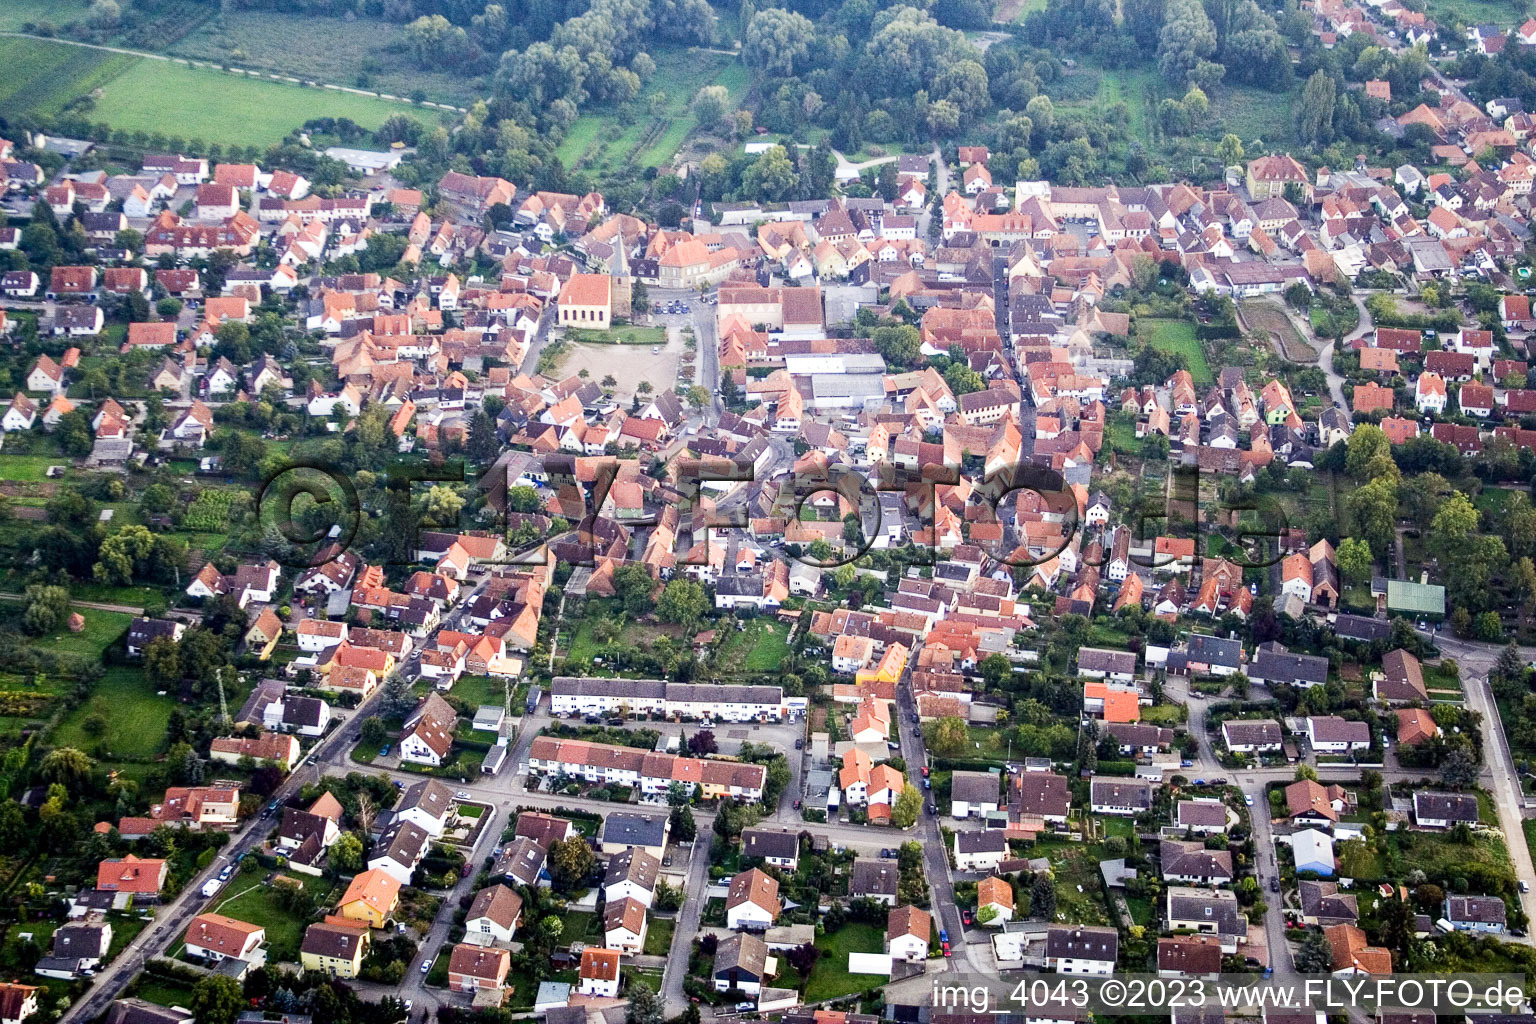 Aerial view of From the north in the district Godramstein in Landau in der Pfalz in the state Rhineland-Palatinate, Germany